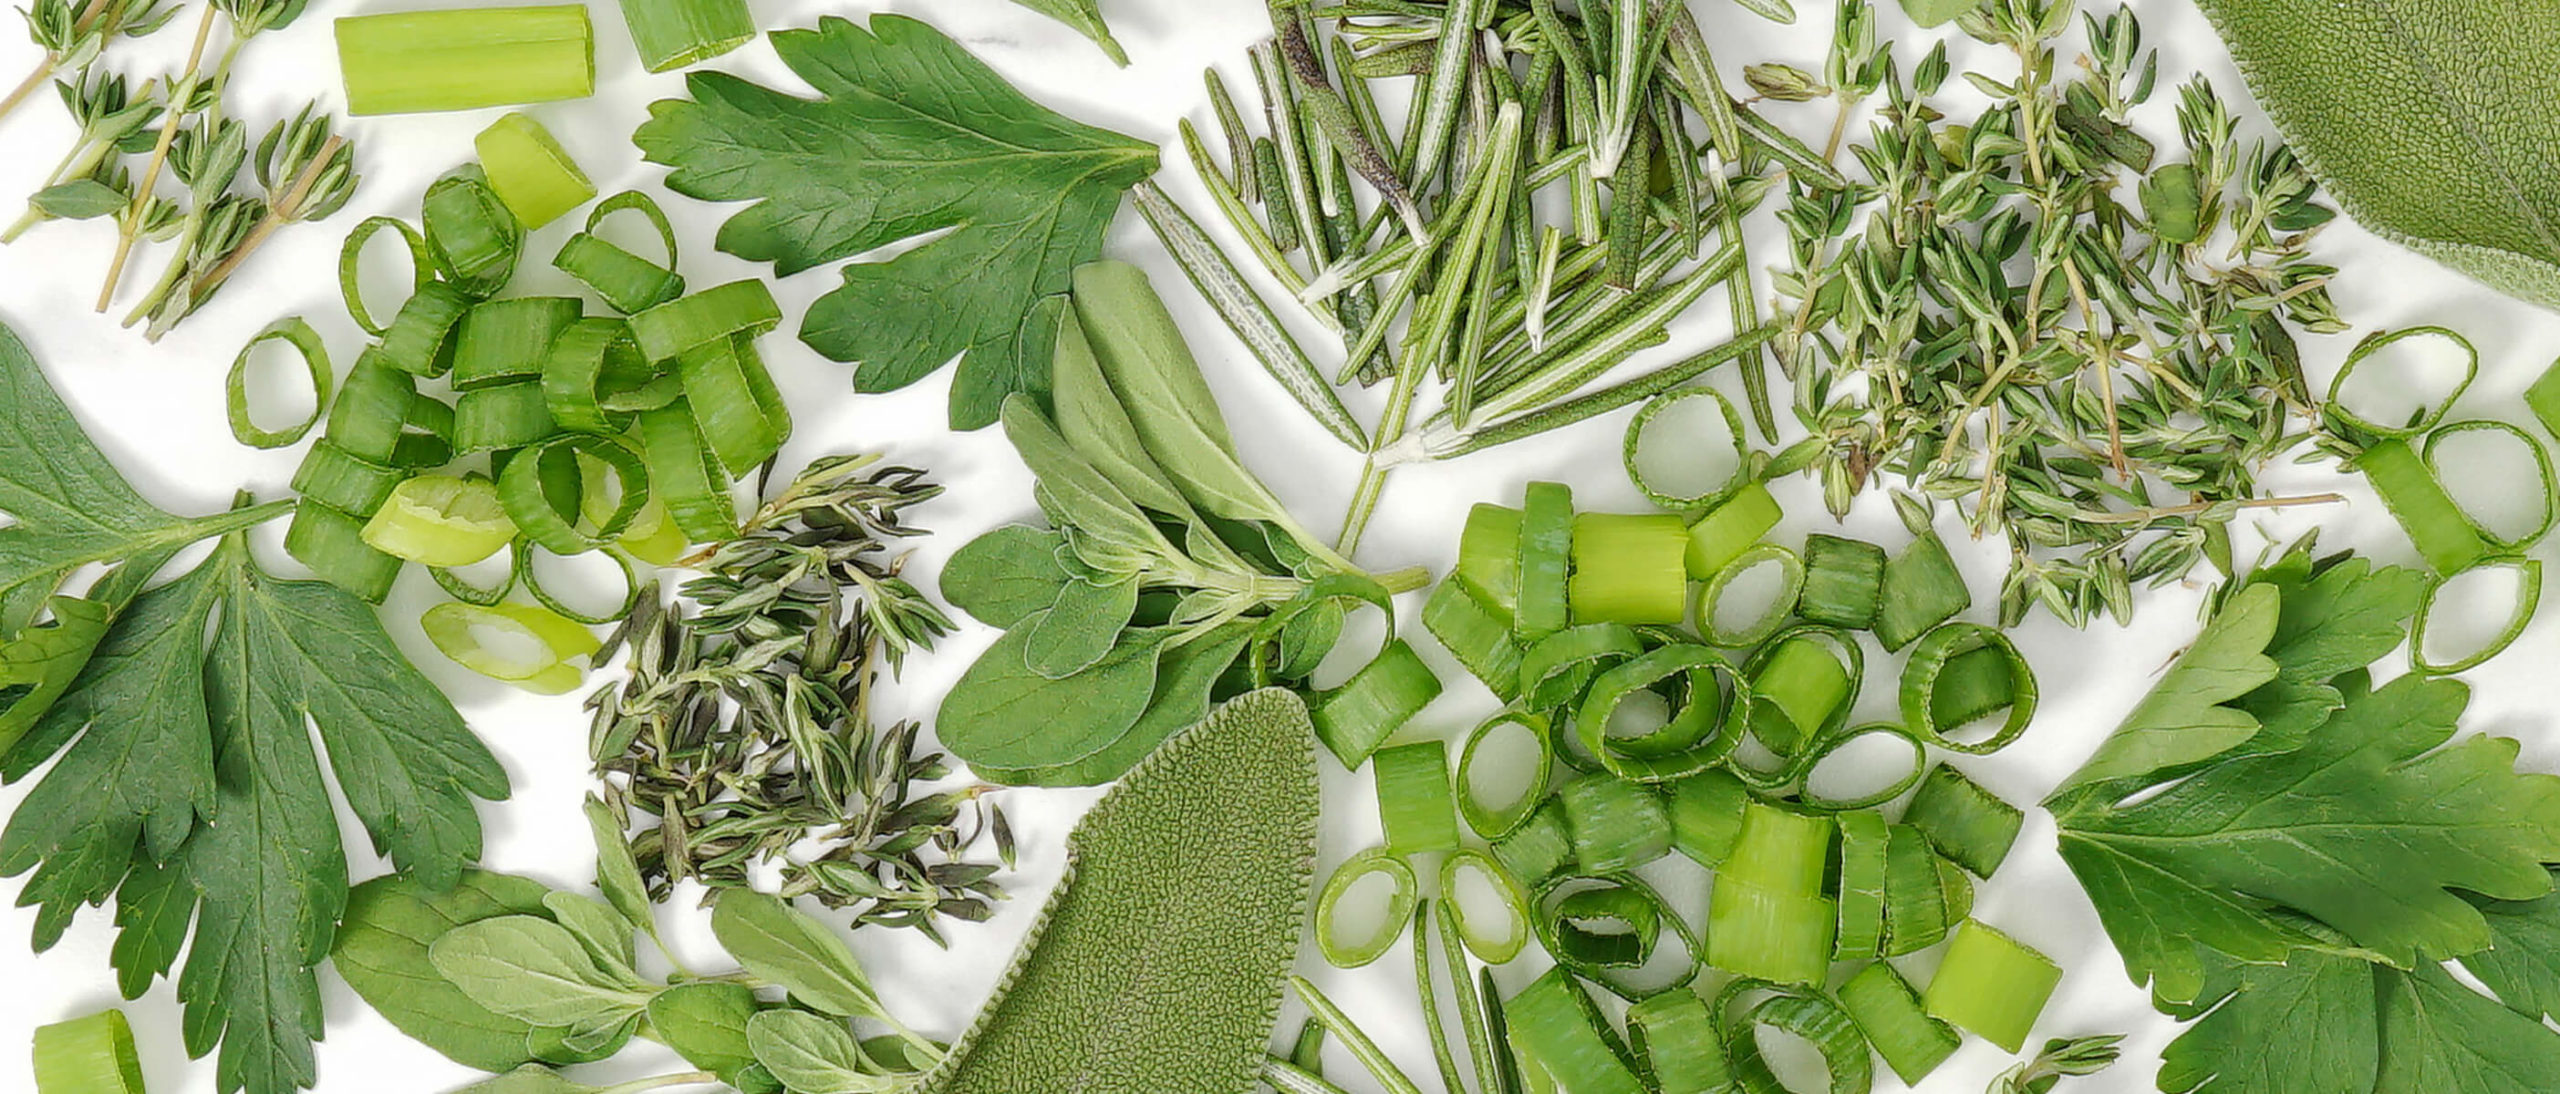 Save Money and Eat Fresh With Your Own Herb Garden